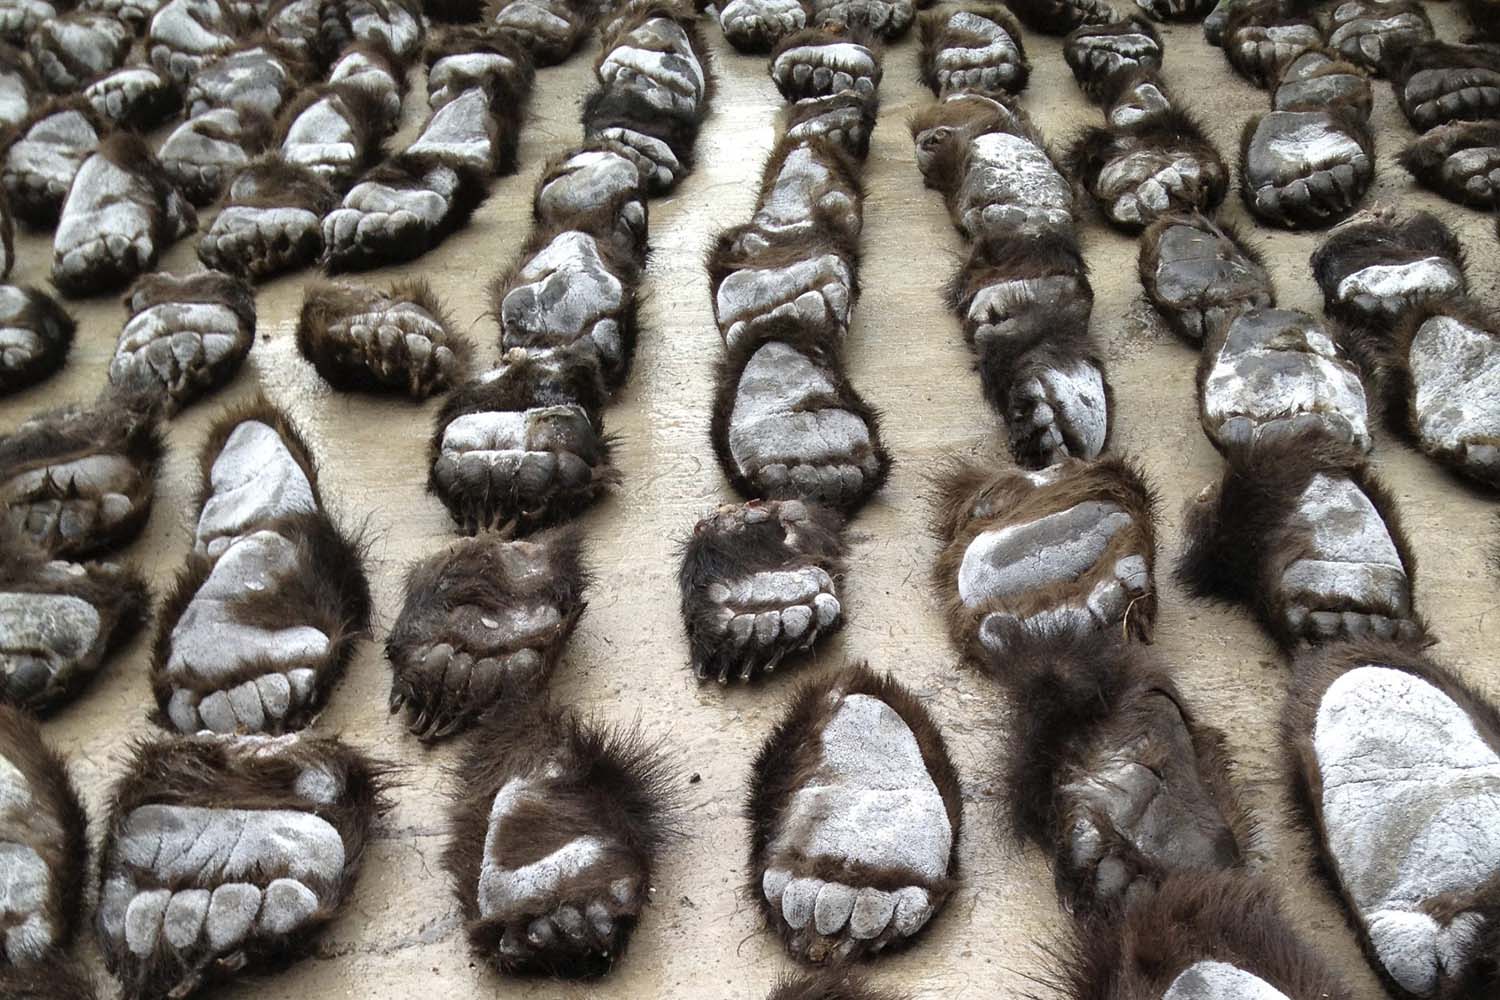 Smuggled bear paws are seen at the China-Russia border in Manzhouli